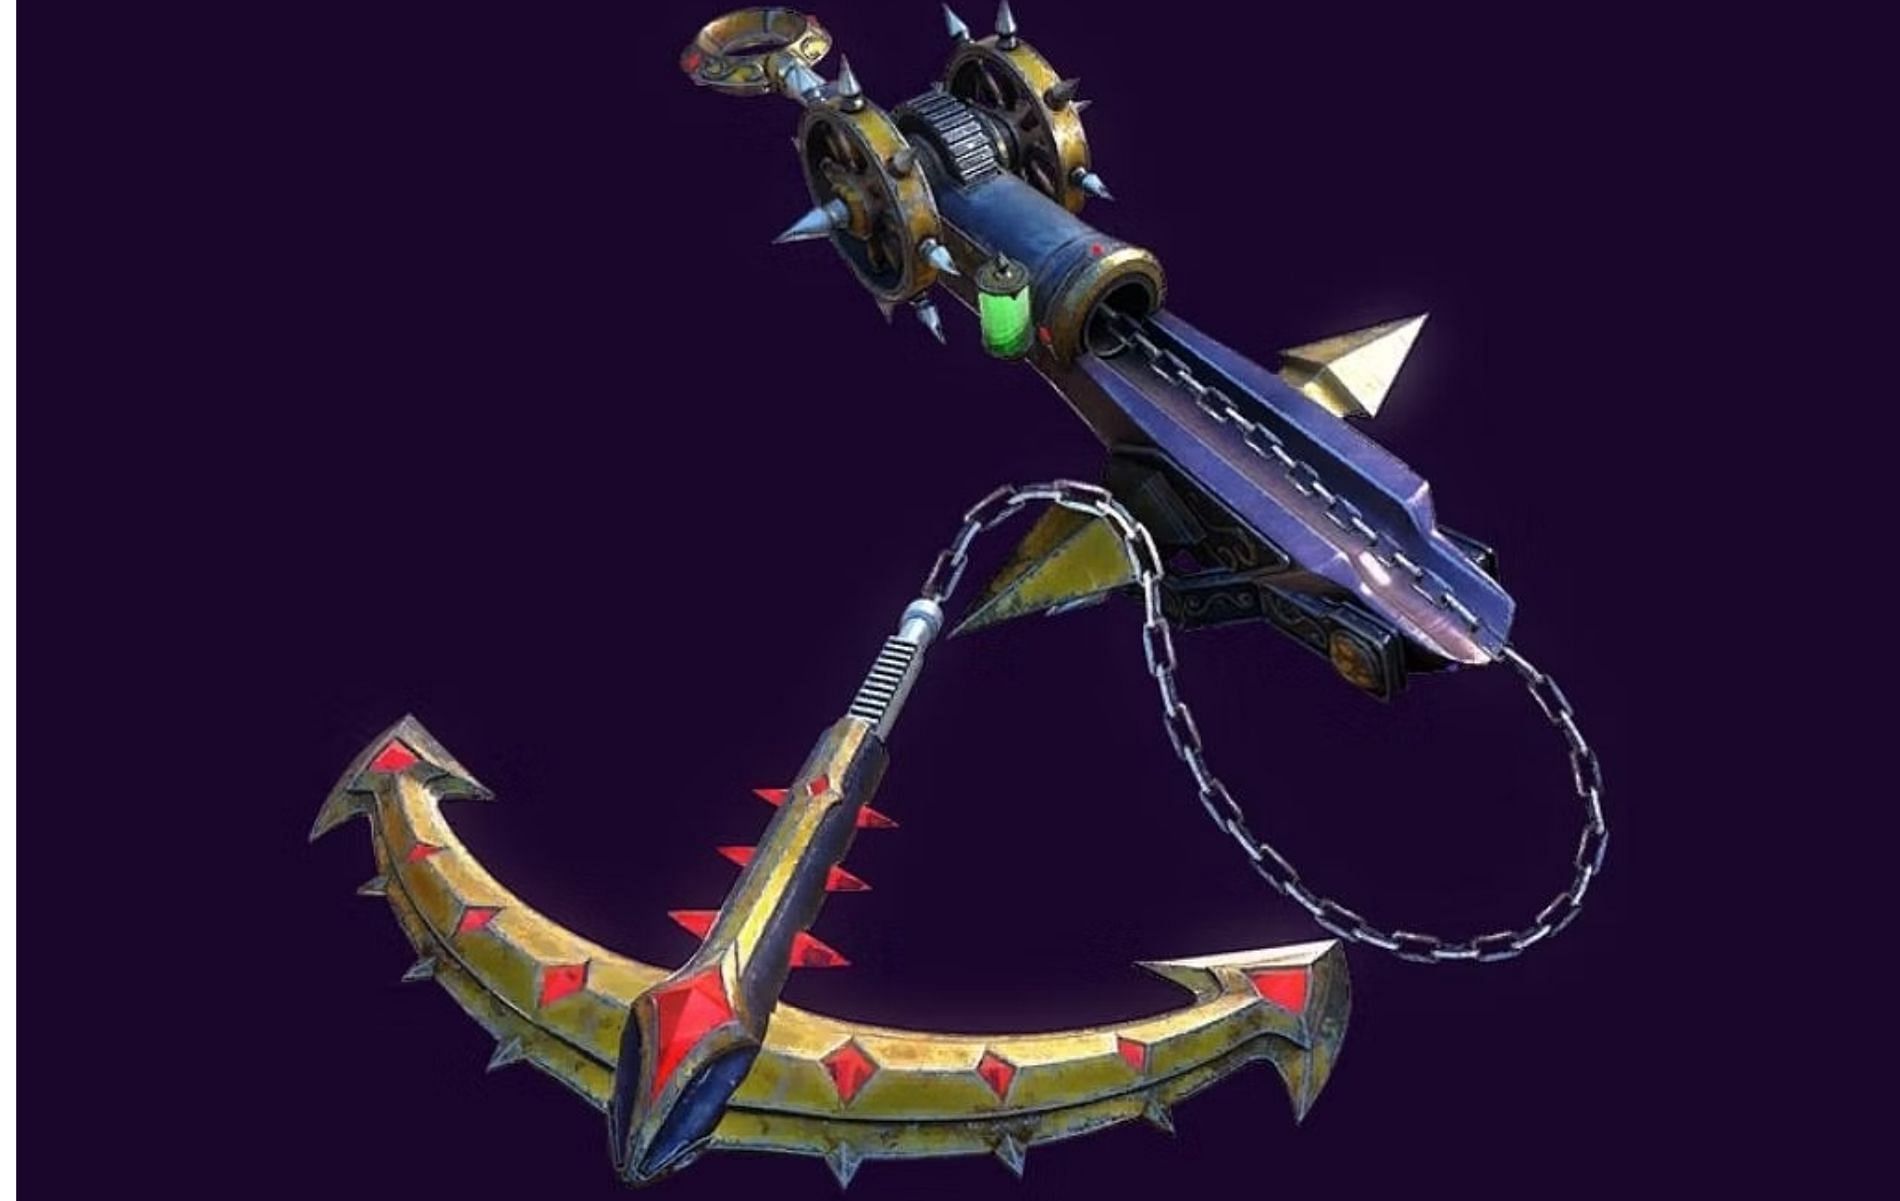 The Cassiopeia is a hook that can inflict heavy loss in Bayonetta 3 (image via Nintendo)